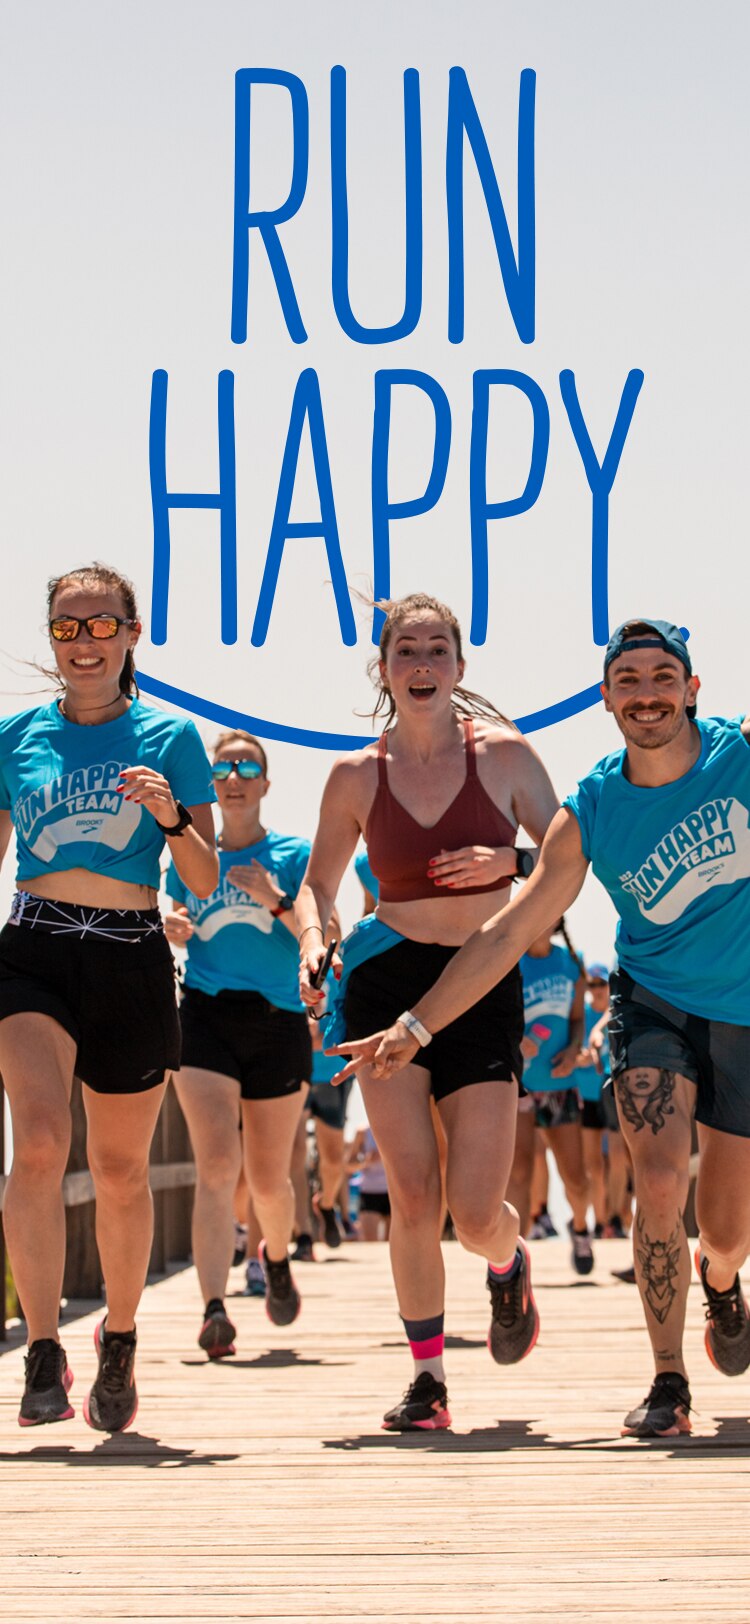 A group of happy runners